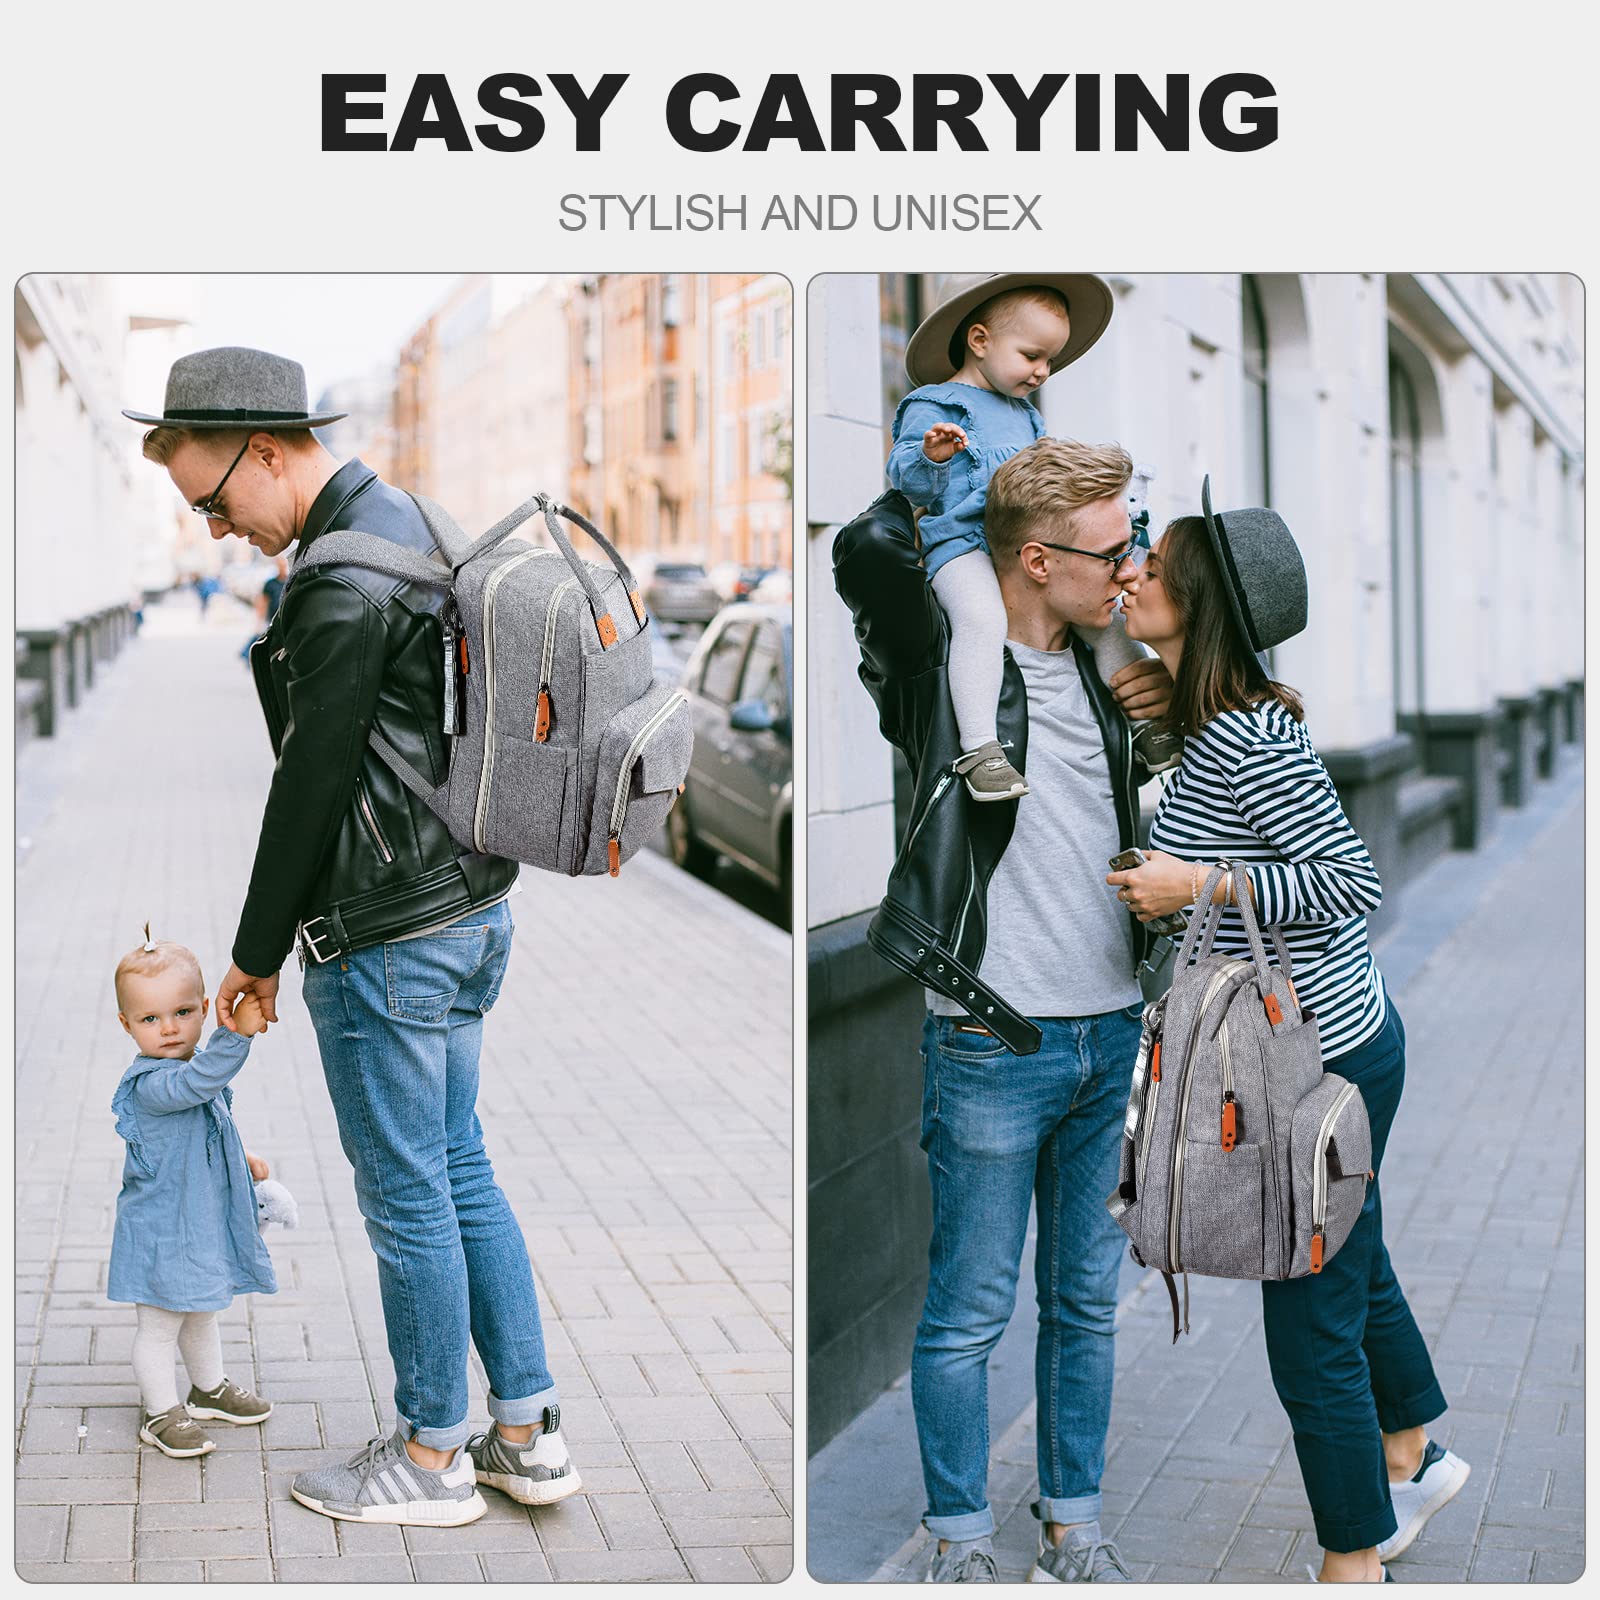 Extra Large Diaper Bag For 2 Kids, 35L Expandable Twin Diaper Bag Backpack For Travel/Shopping, Easy Access Design / 4 Big Insulated + 2 Wet Cloth Pocket For 2 Babies / Waterproof/Back Support Cushion